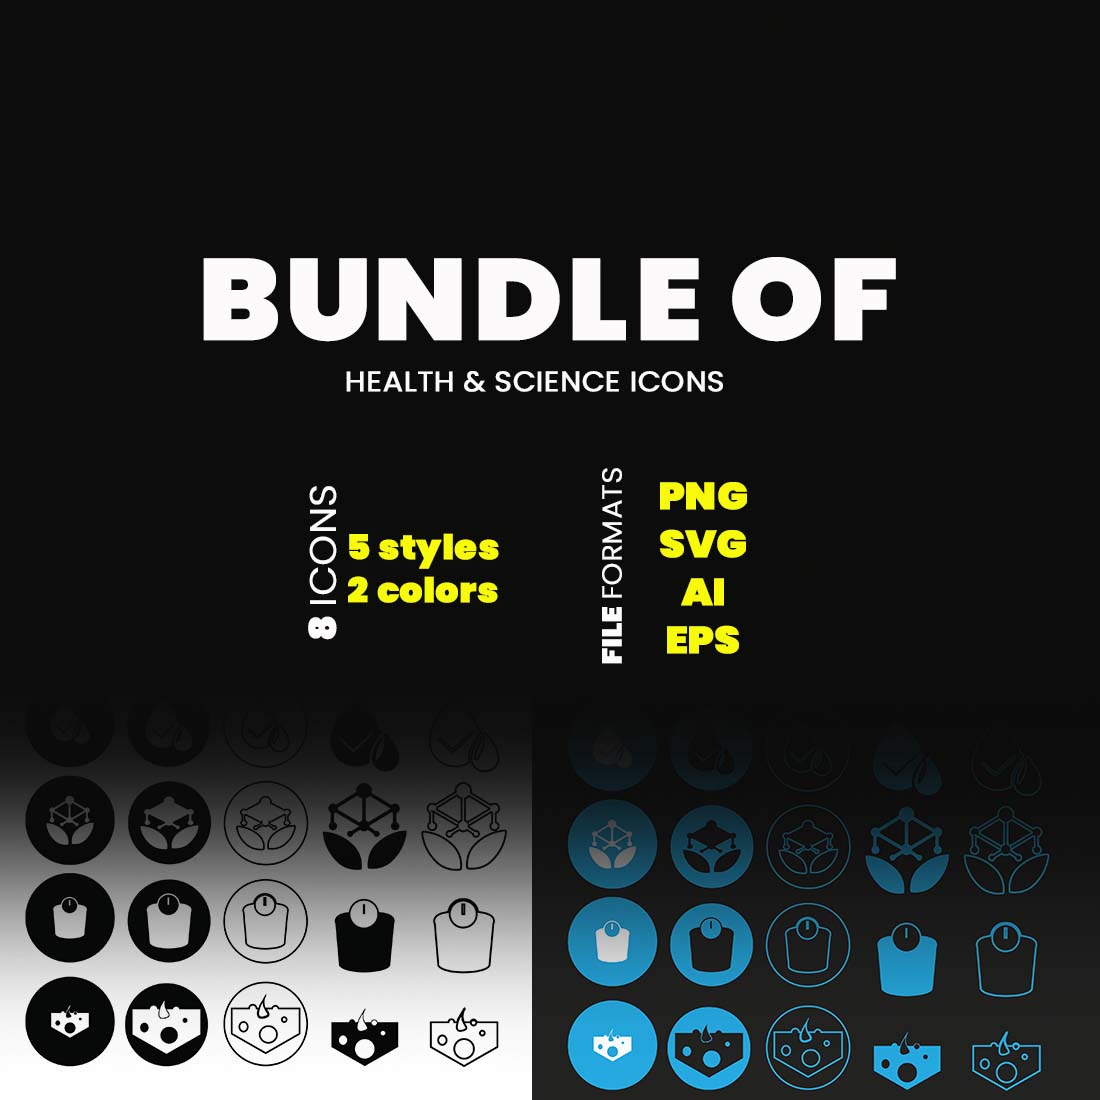 35 Science and Health Icons Bundle preview image.